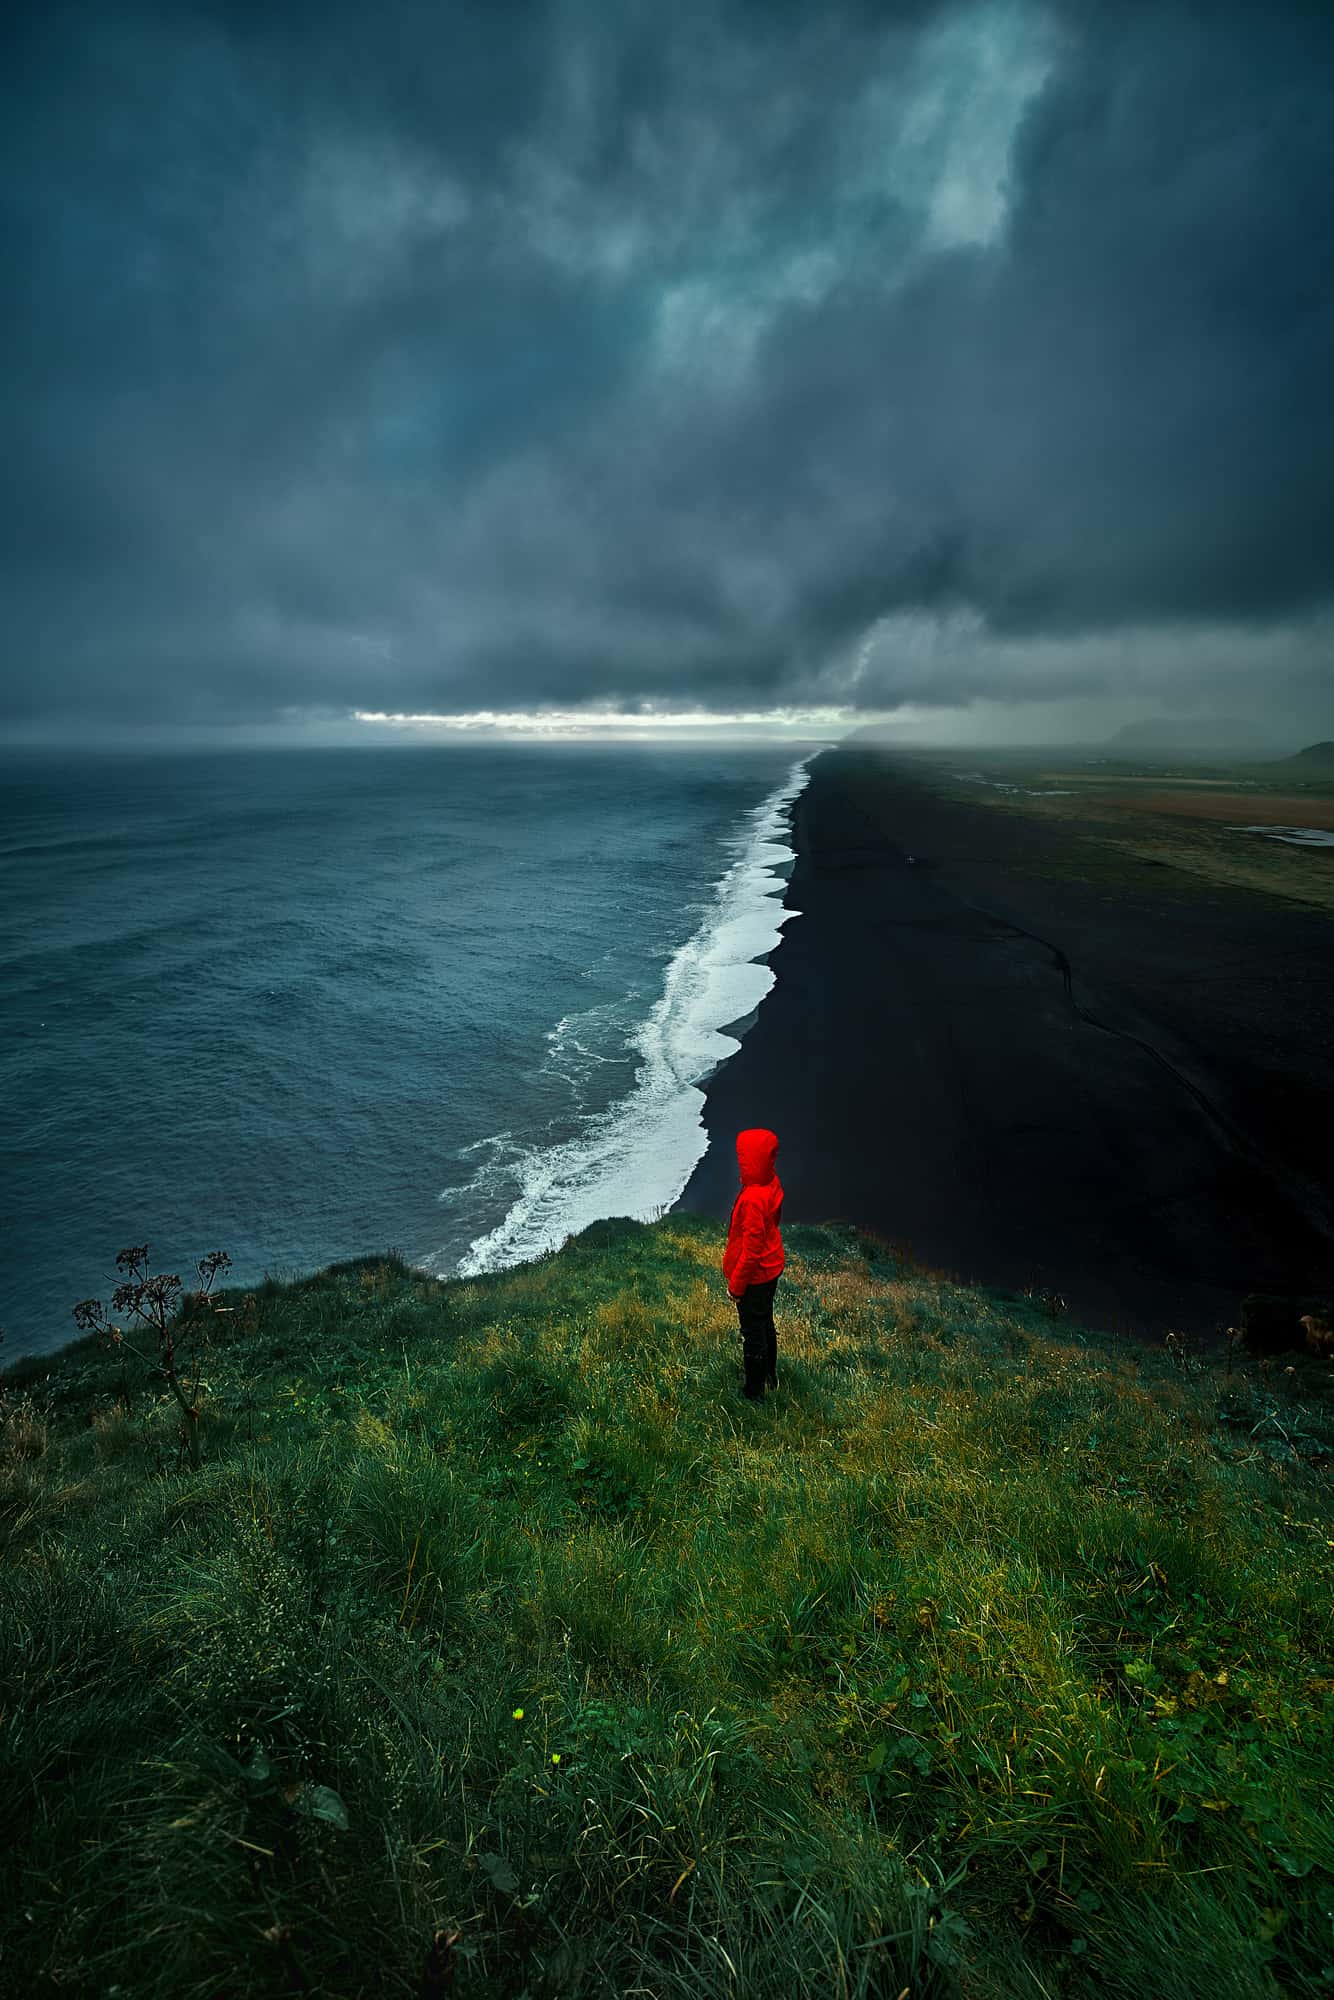 Dyrholaey viewpoint in Iceland offers stunning black beach in Iceland views